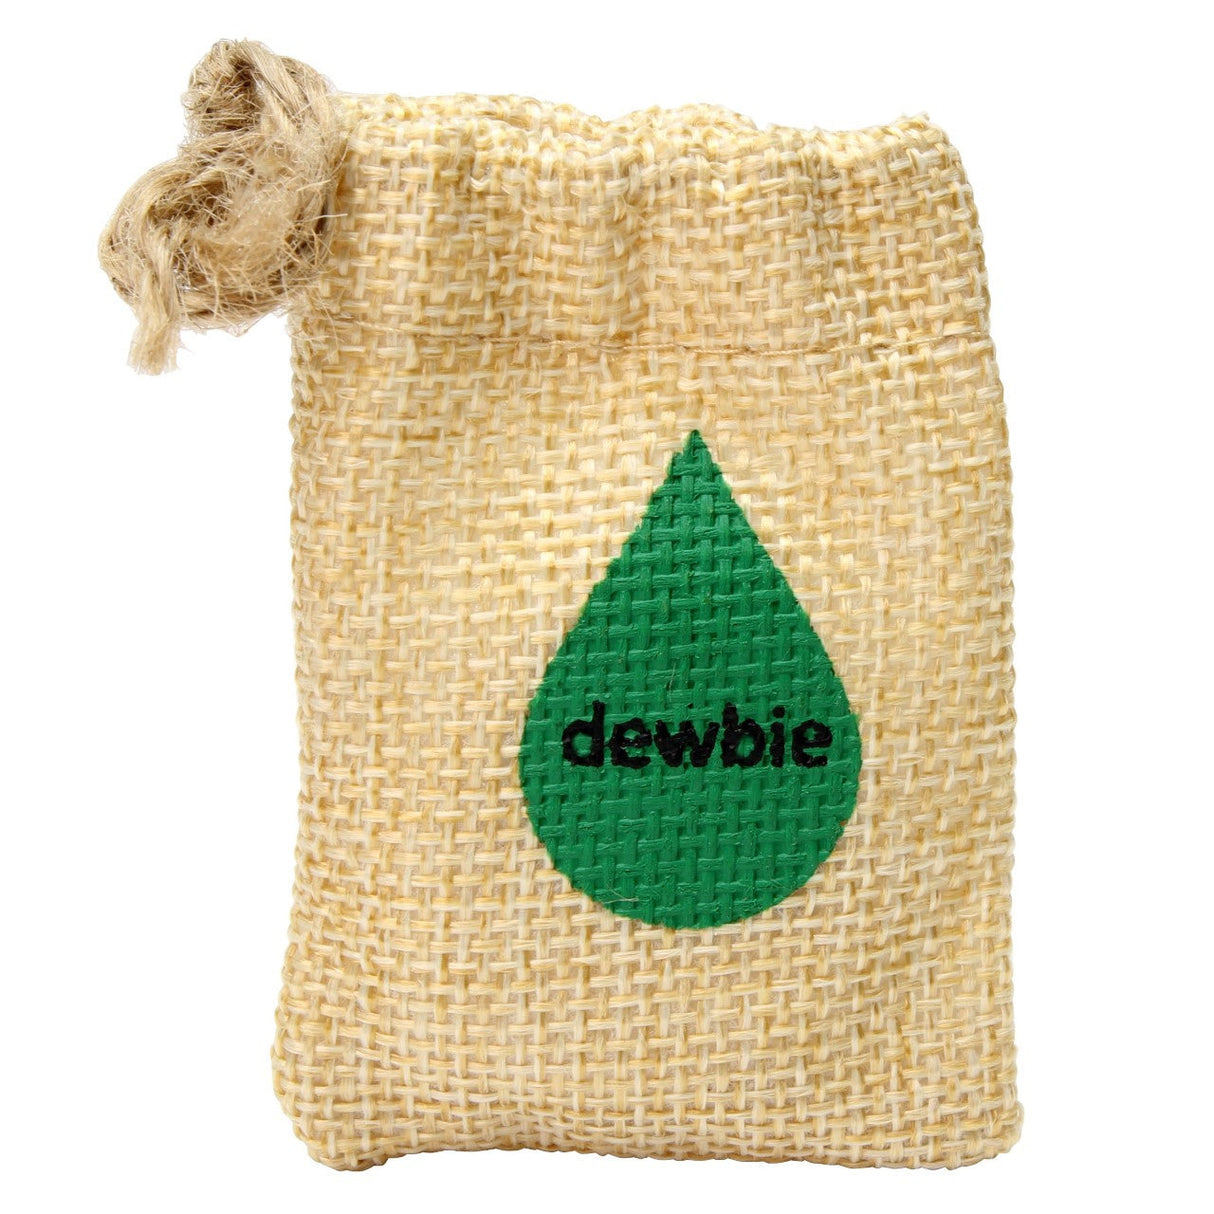 Dewbie Handmade Humidifier Stone in hemp bag front view, ideal for maintaining tobacco moisture